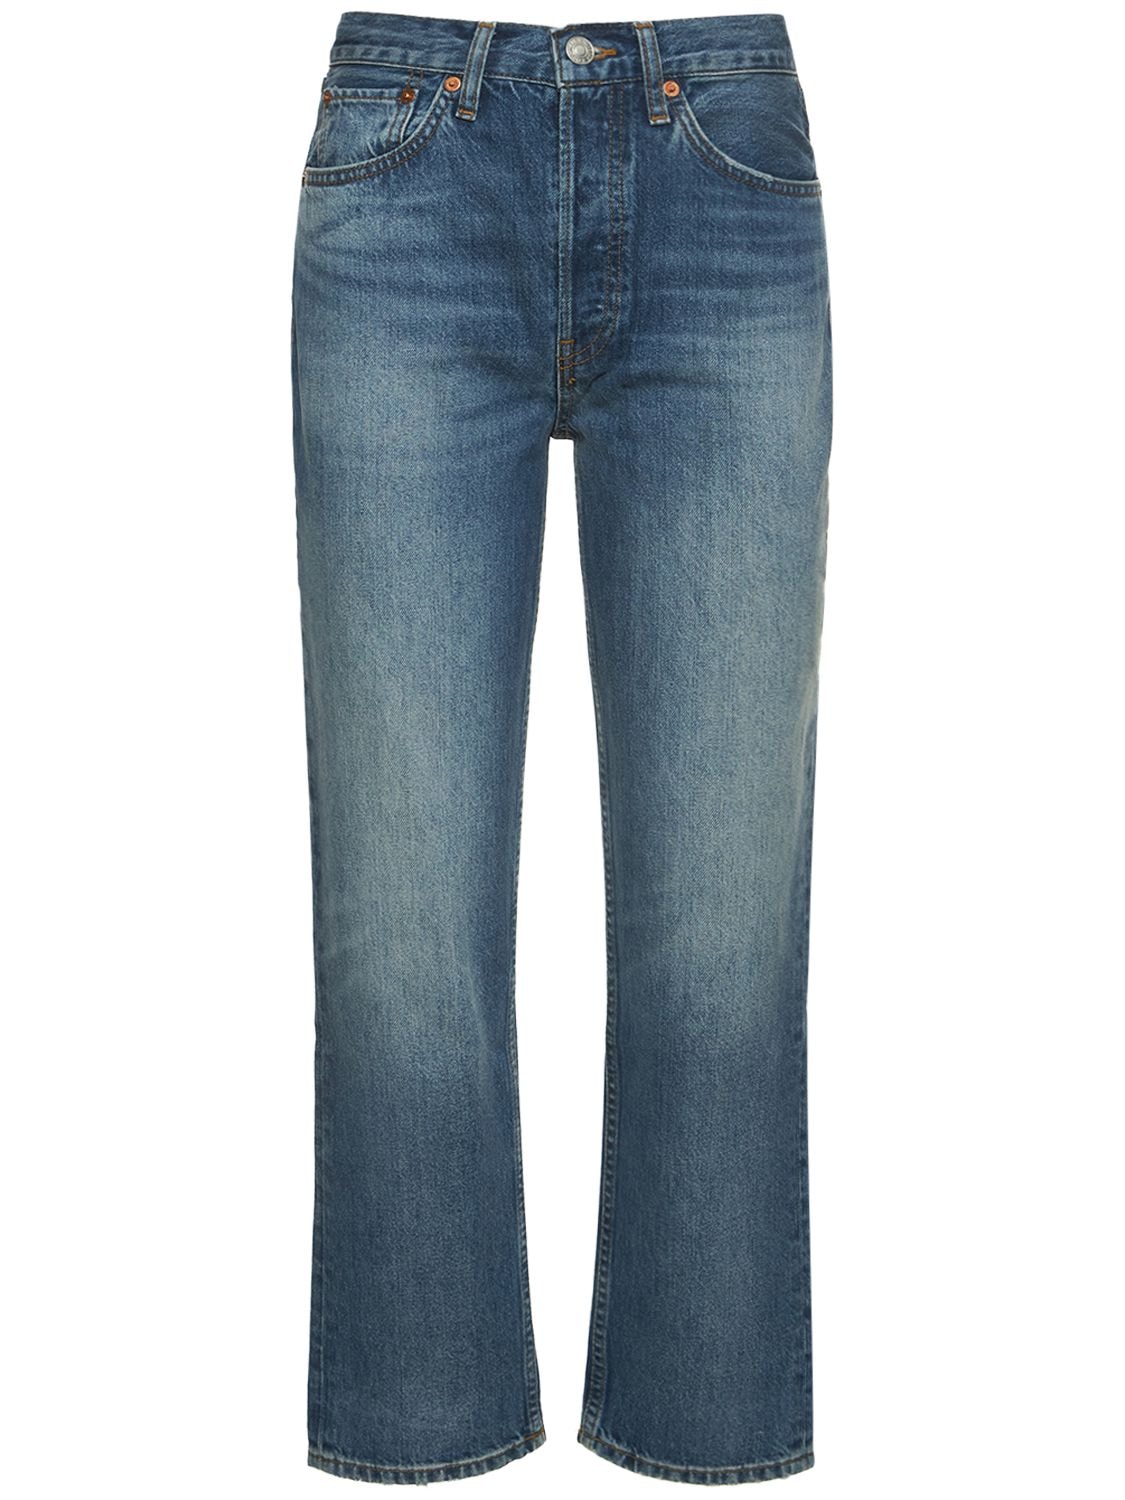 70s Stove Pipe High Rise Jean